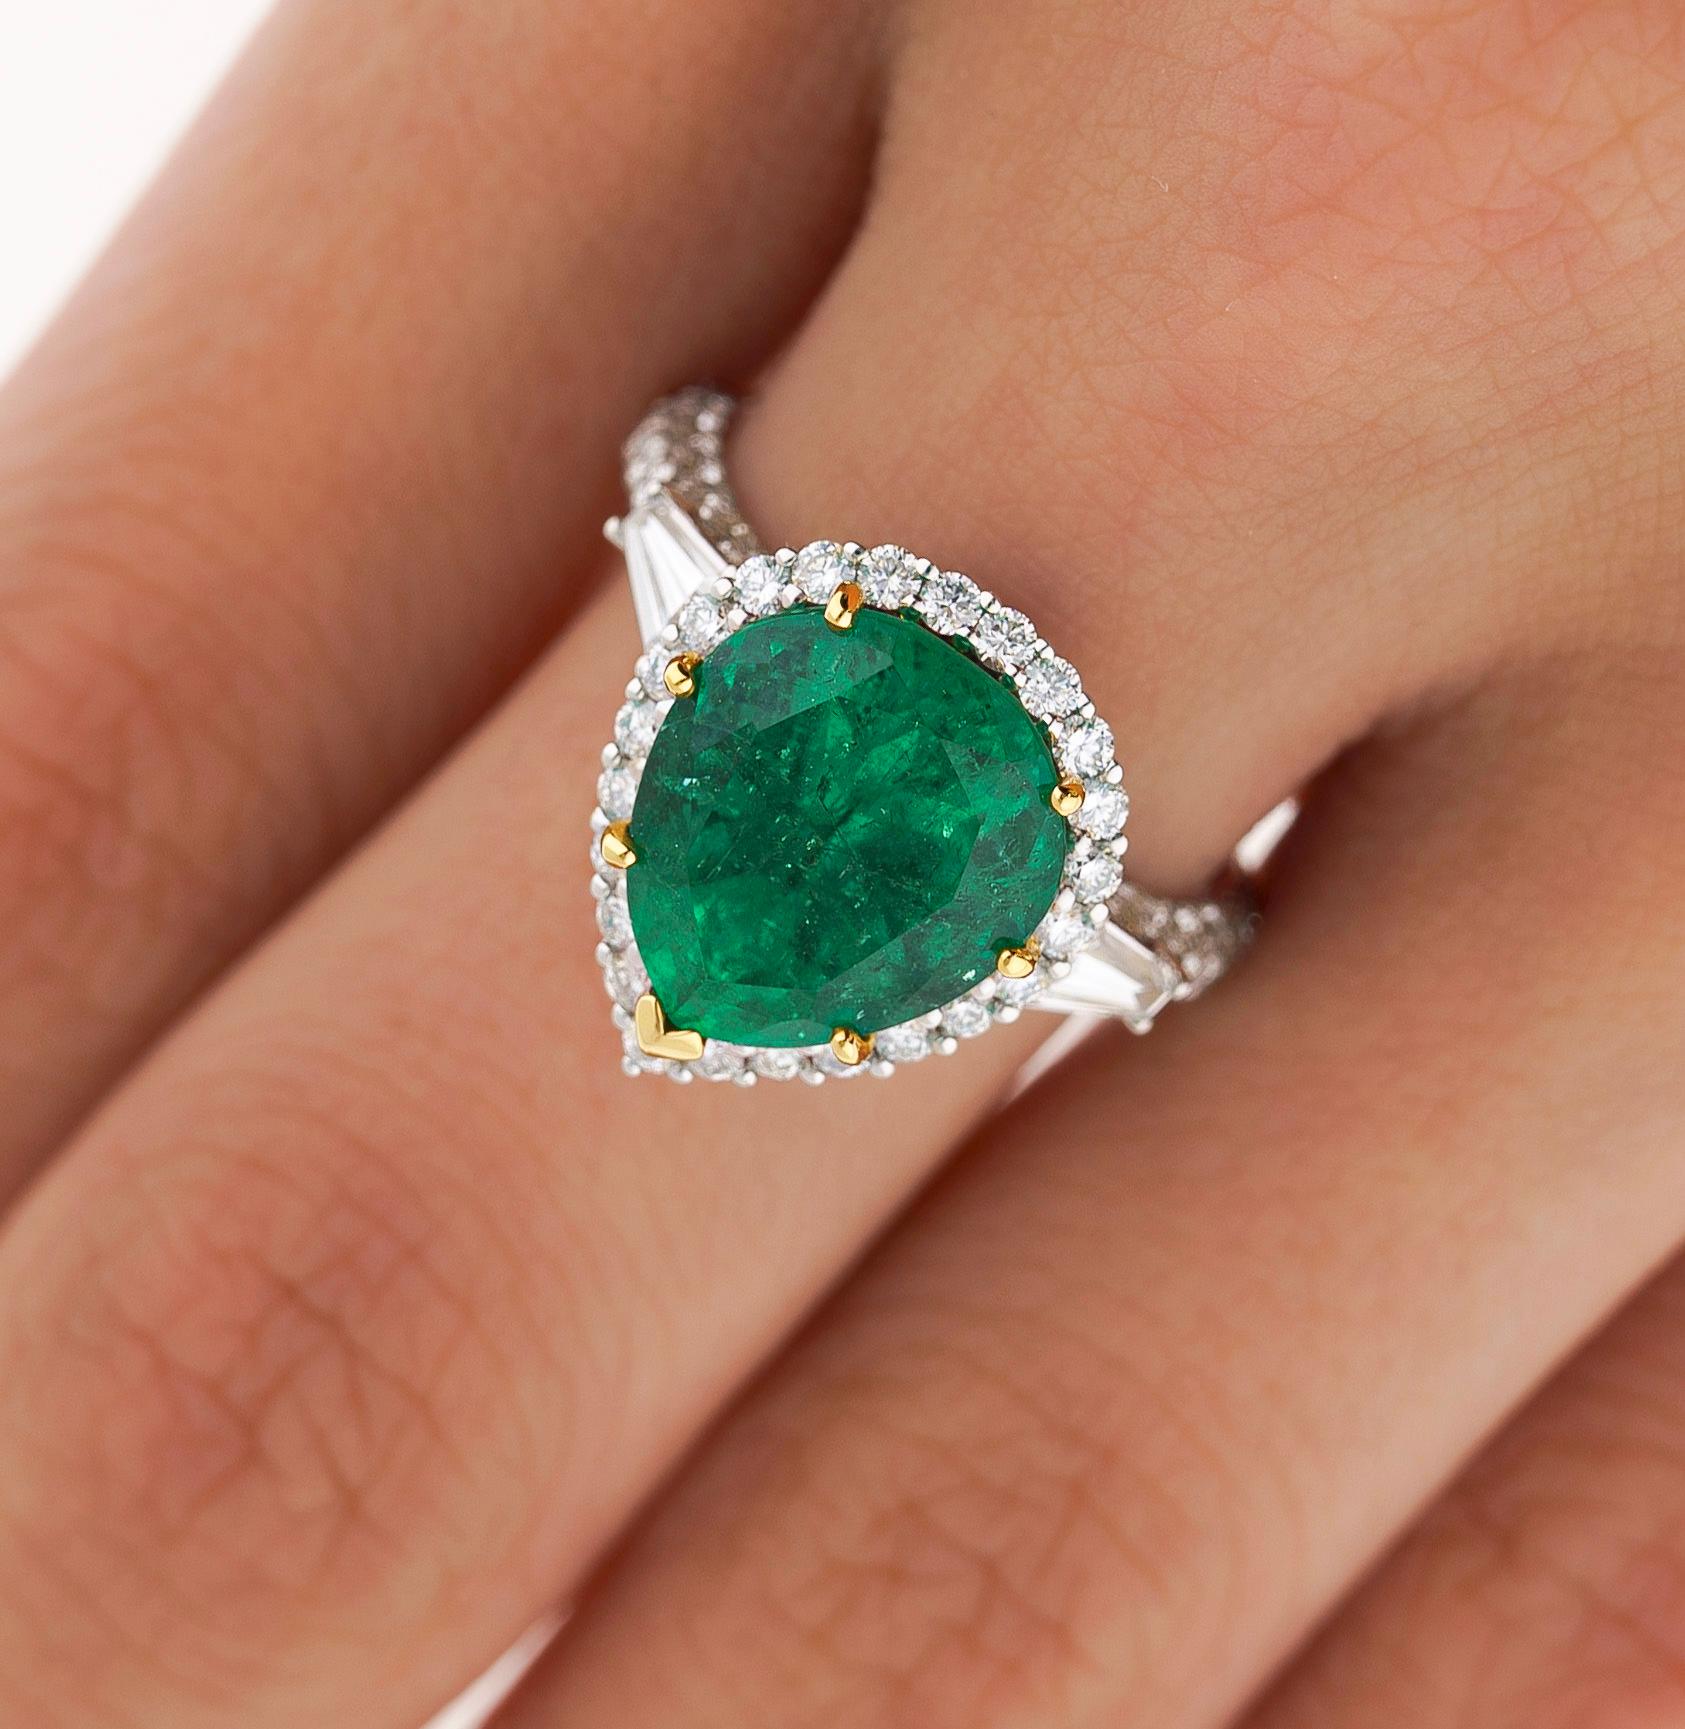 5.12 Carat Vivid Green Pear Cut Colombian Emerald and Diamond Ring in 18K Gold For Sale 7